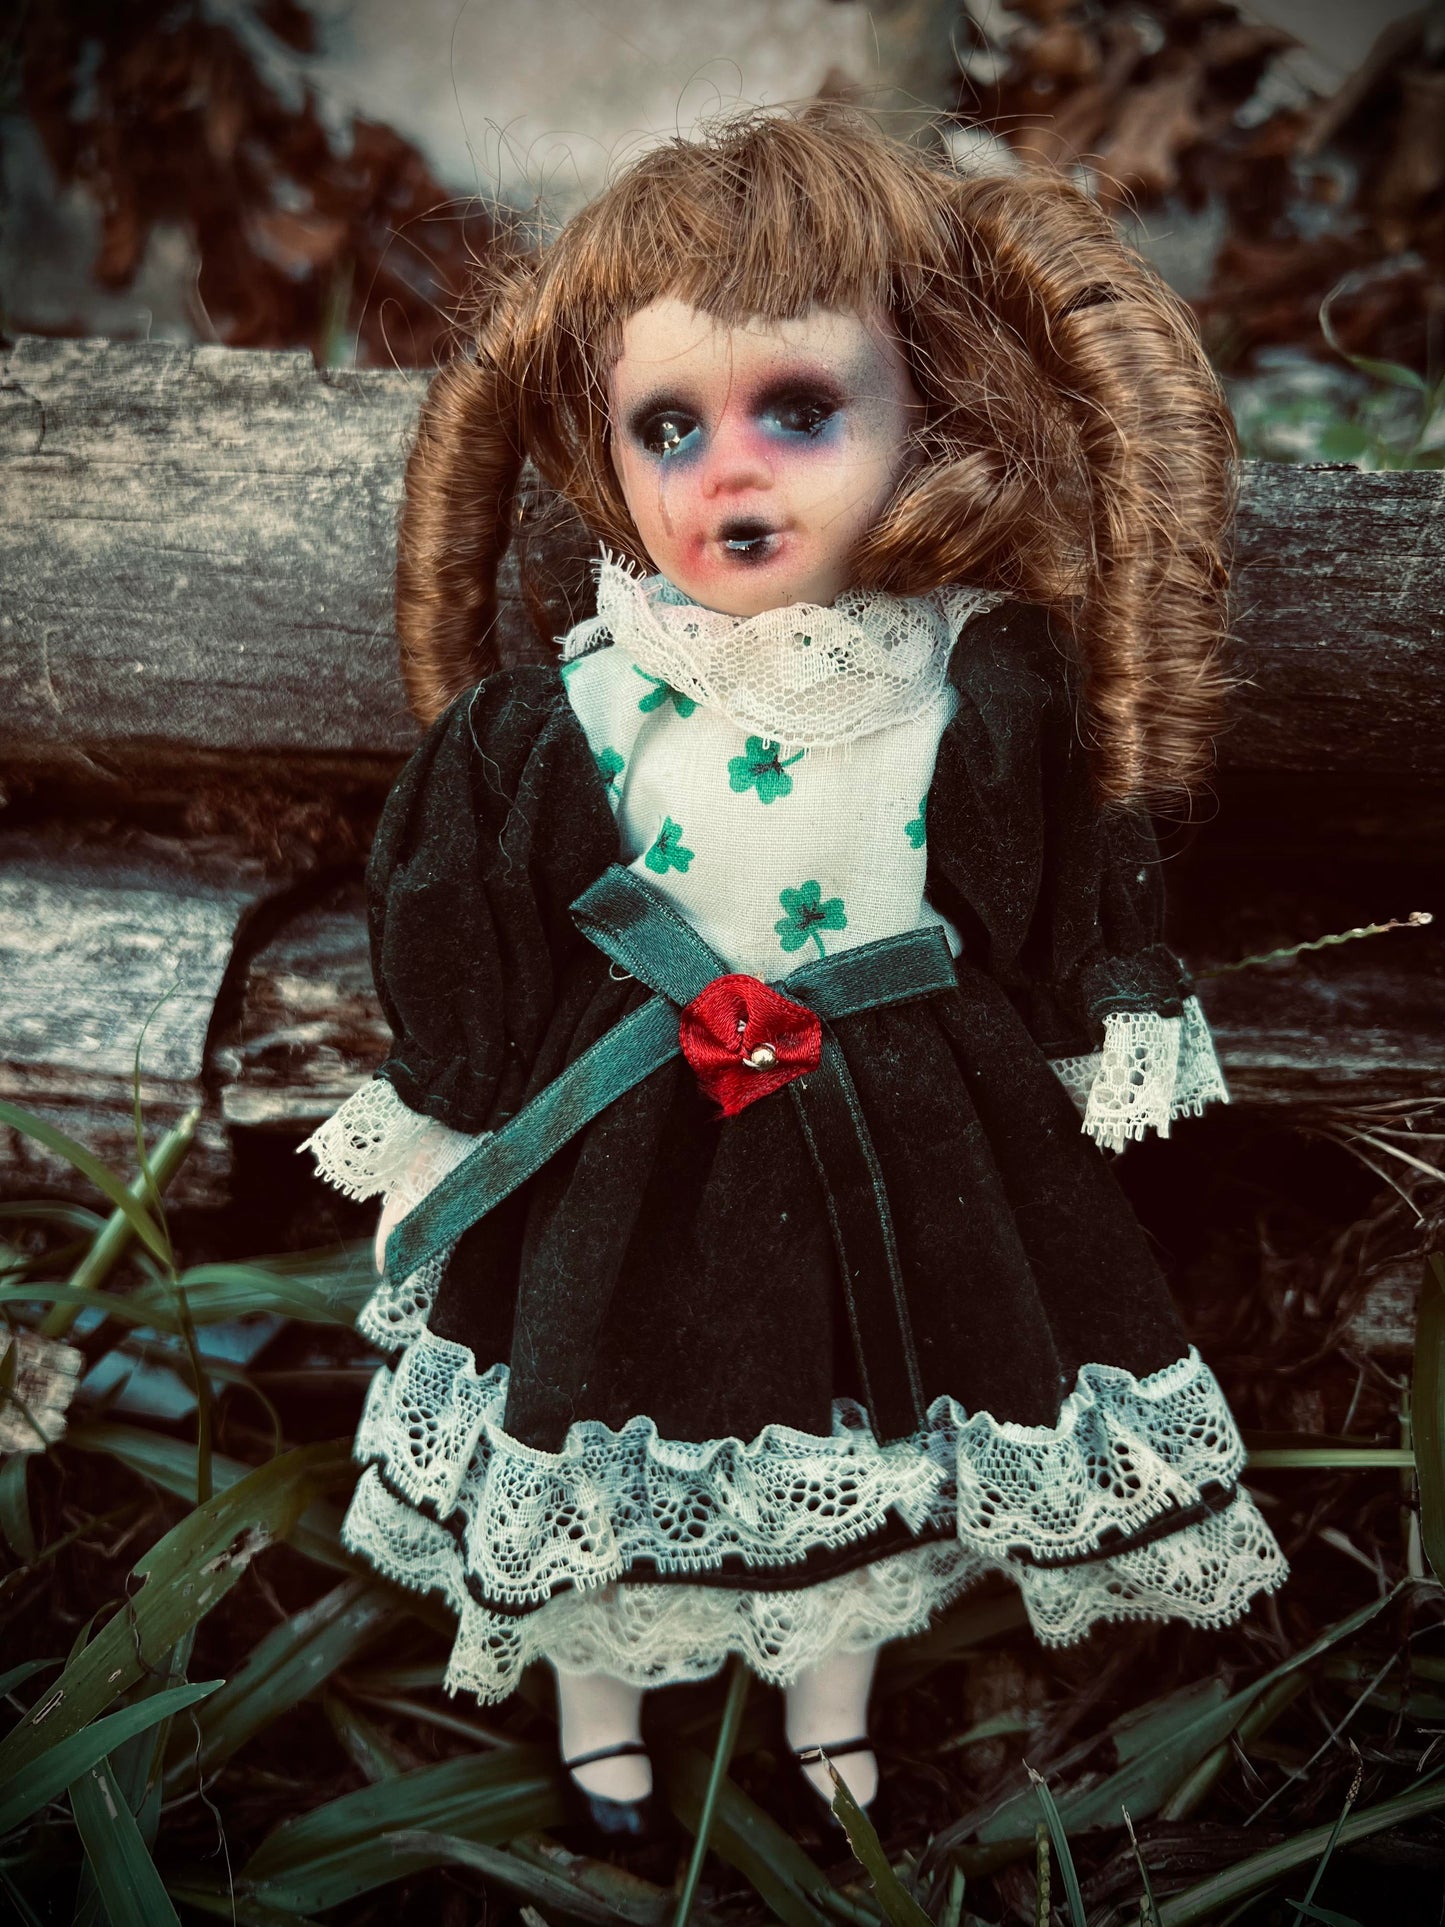 Meet Mildred 8" Mini Haunt Doll Porcelain Creepy Haunted Spirit Infected Scary Poltergeist Spooky Zombie Possessed Gothic Positive Energy